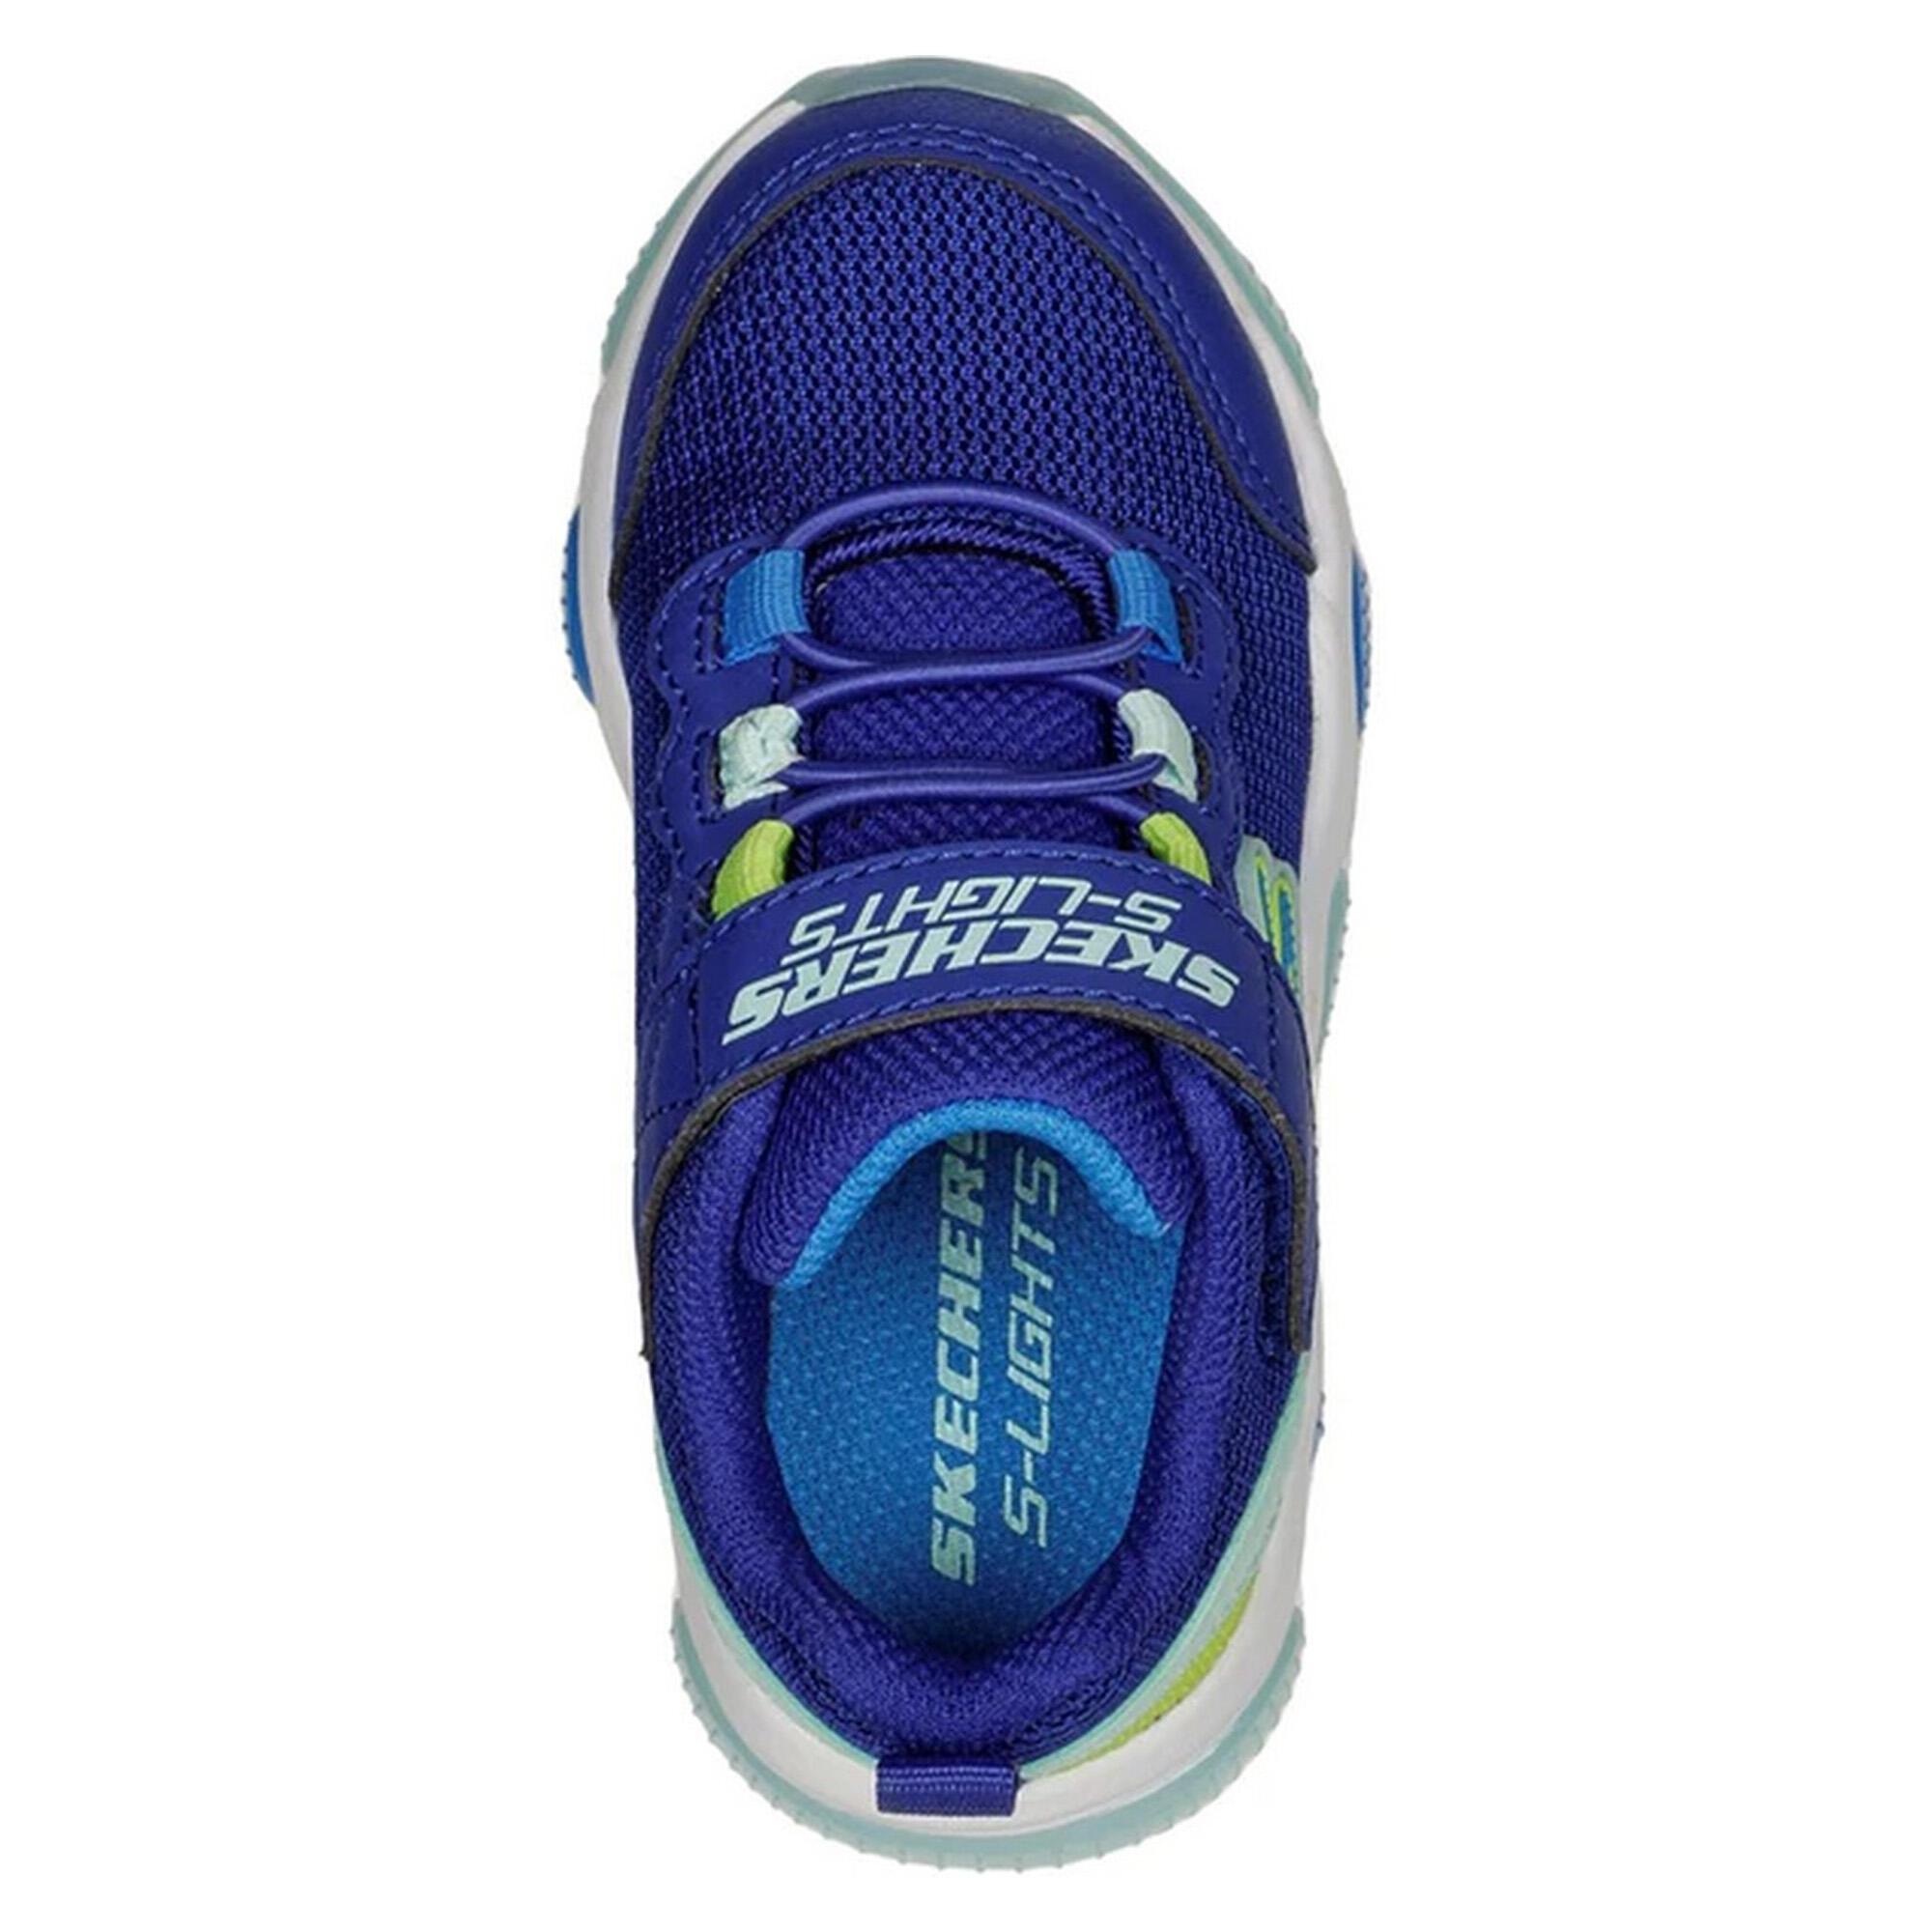 Boys S Lights Mighty Glow Trainers (Blue/Lime) 4/5